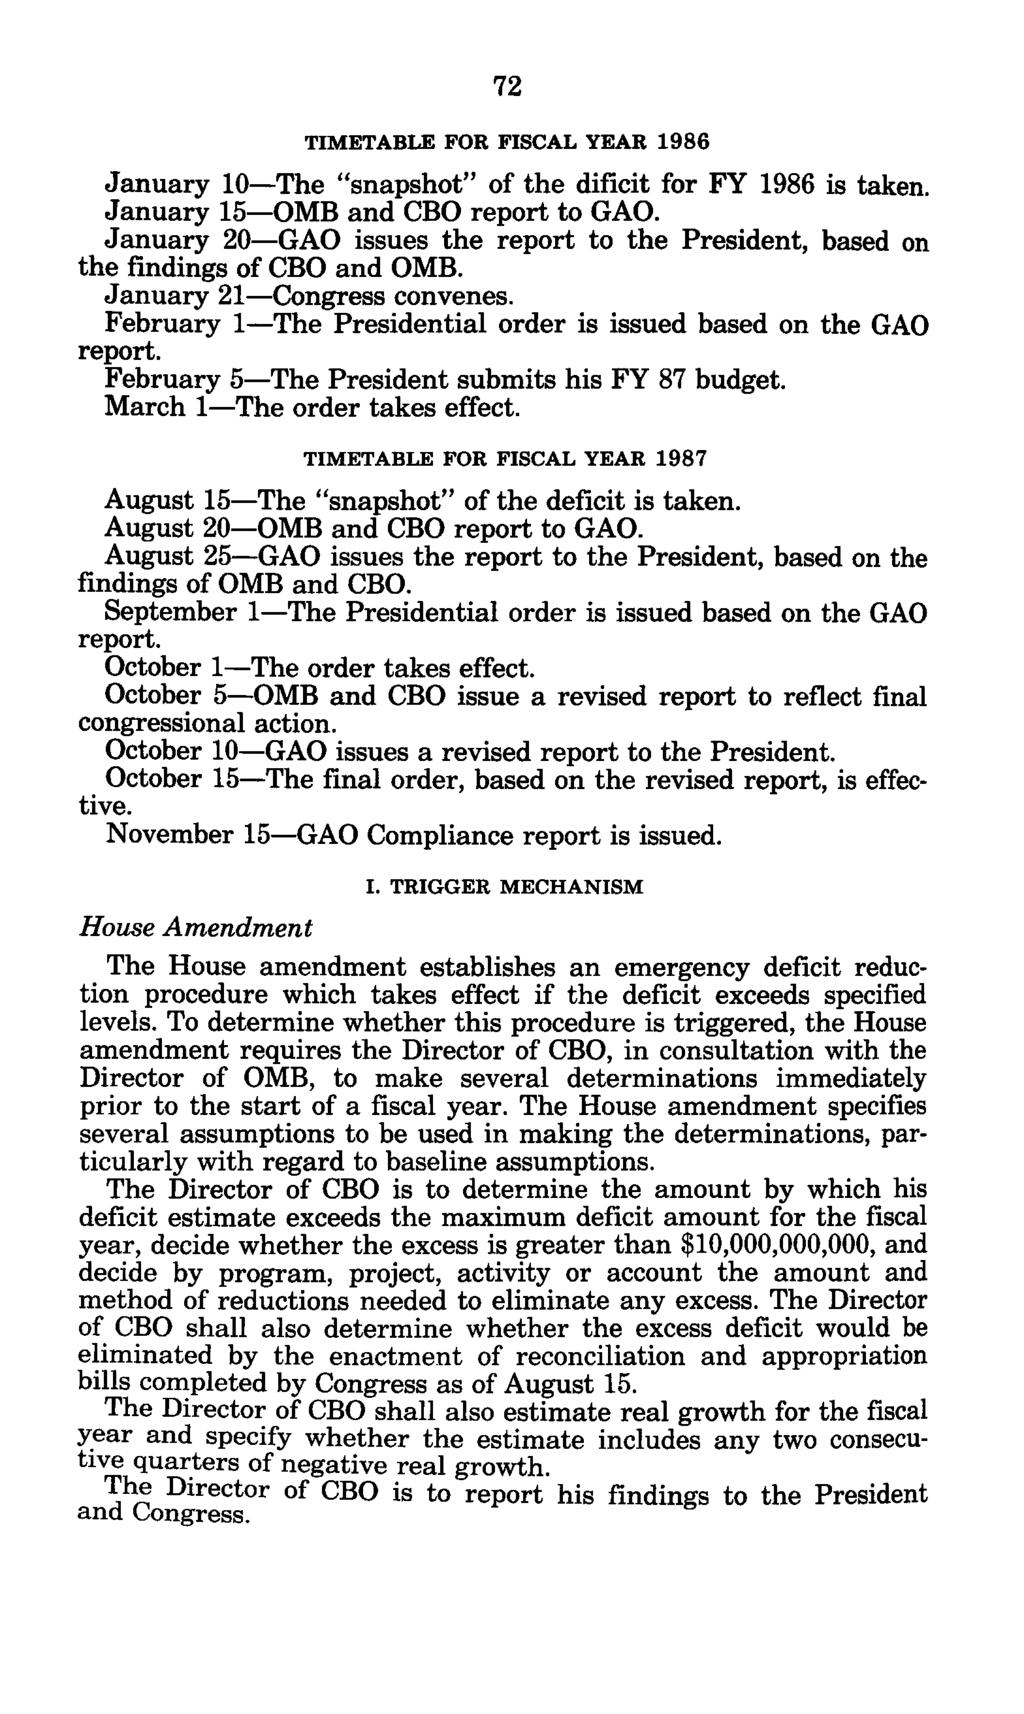 TIMETABLE FOR FISCAL YEAR 1986 January 10-The "snapshot" of the dificit for FY 1986 is taken. January 15-OMB and CBO report to GAO.